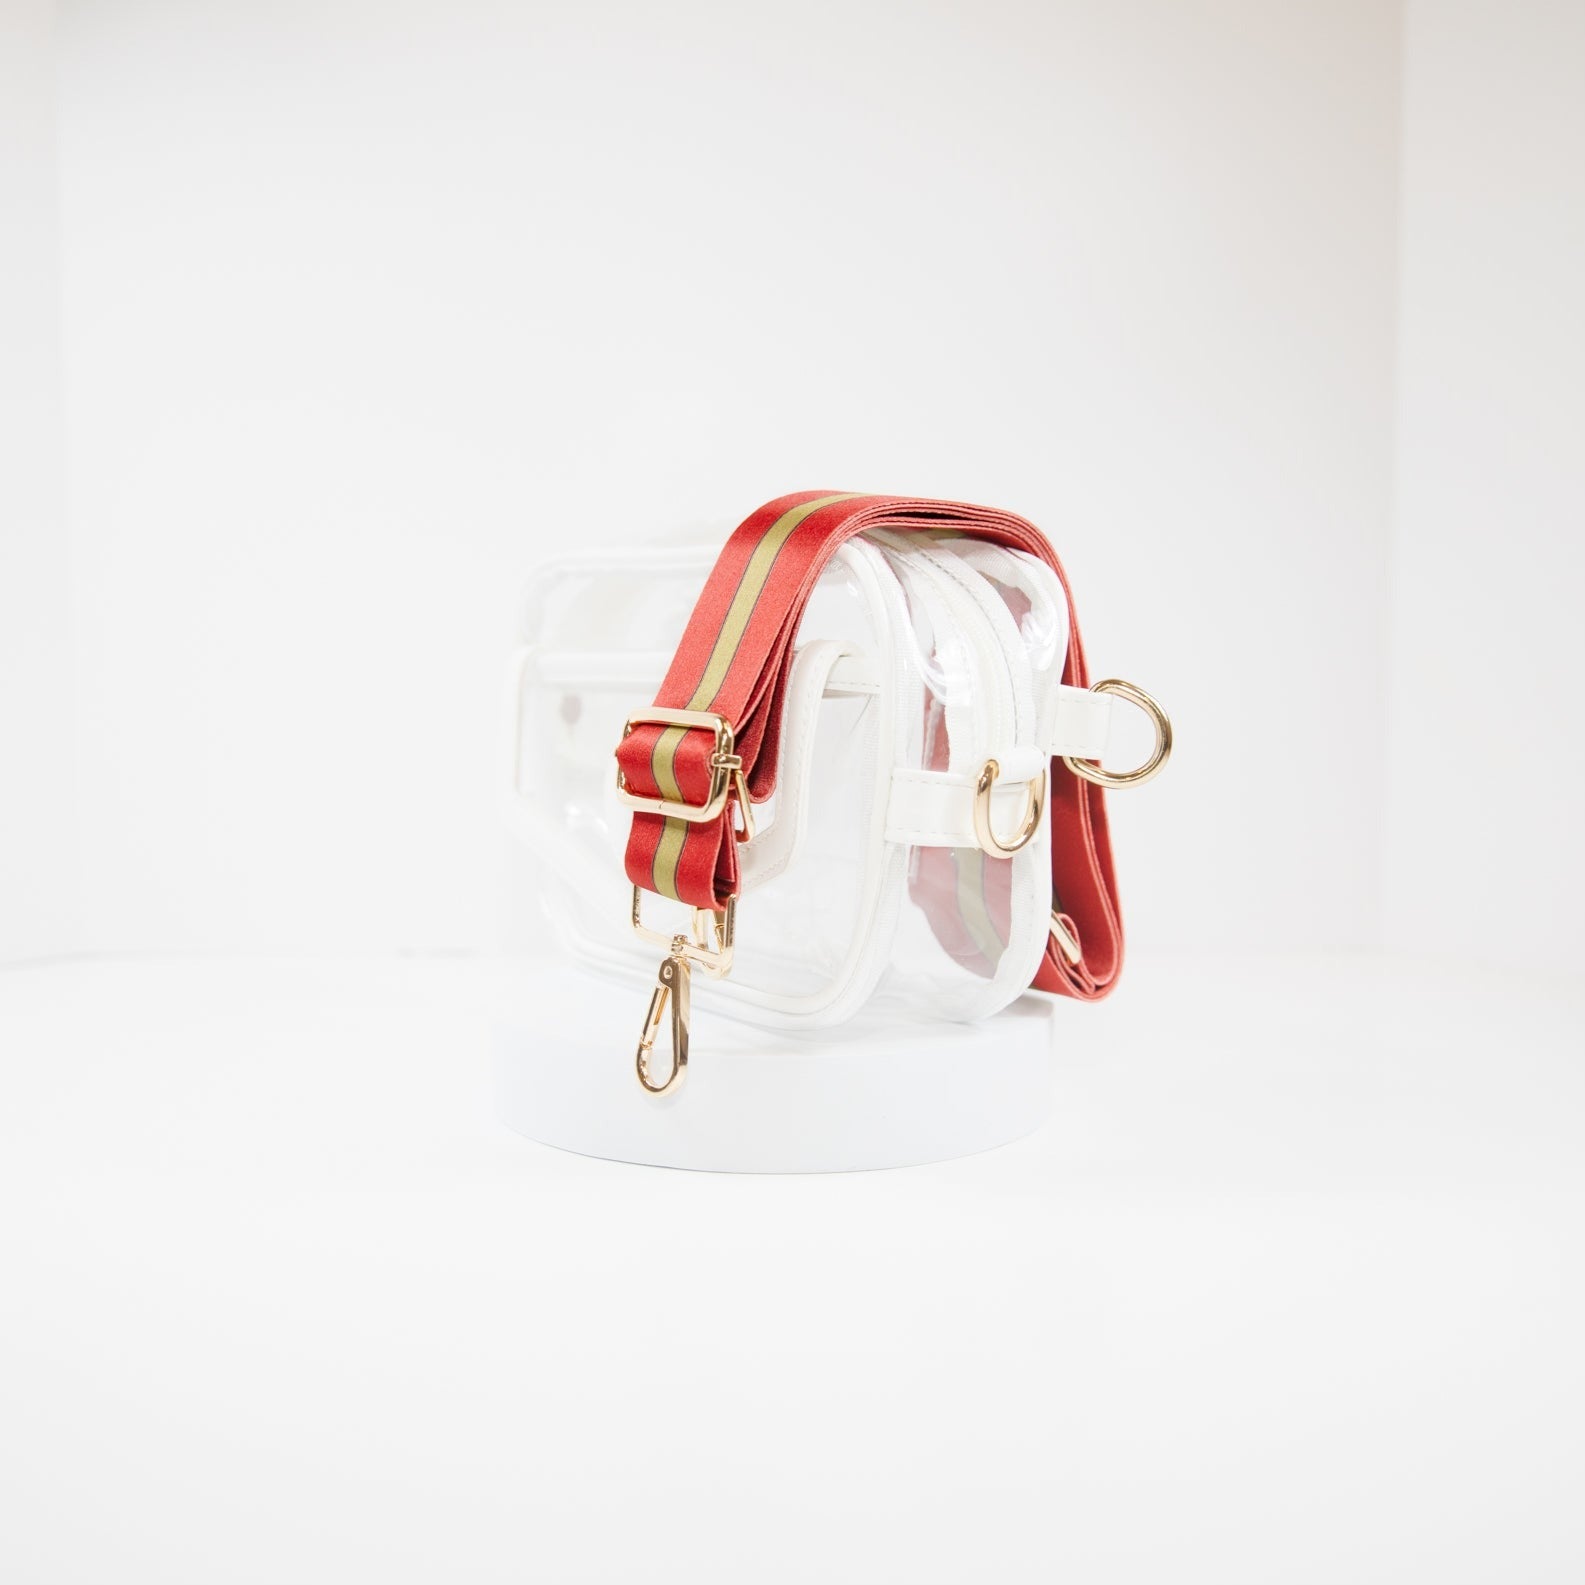 Clear Stadium Bag in white leather trim, side facing, with a crossbody strap in San Francisco 49er team colors.